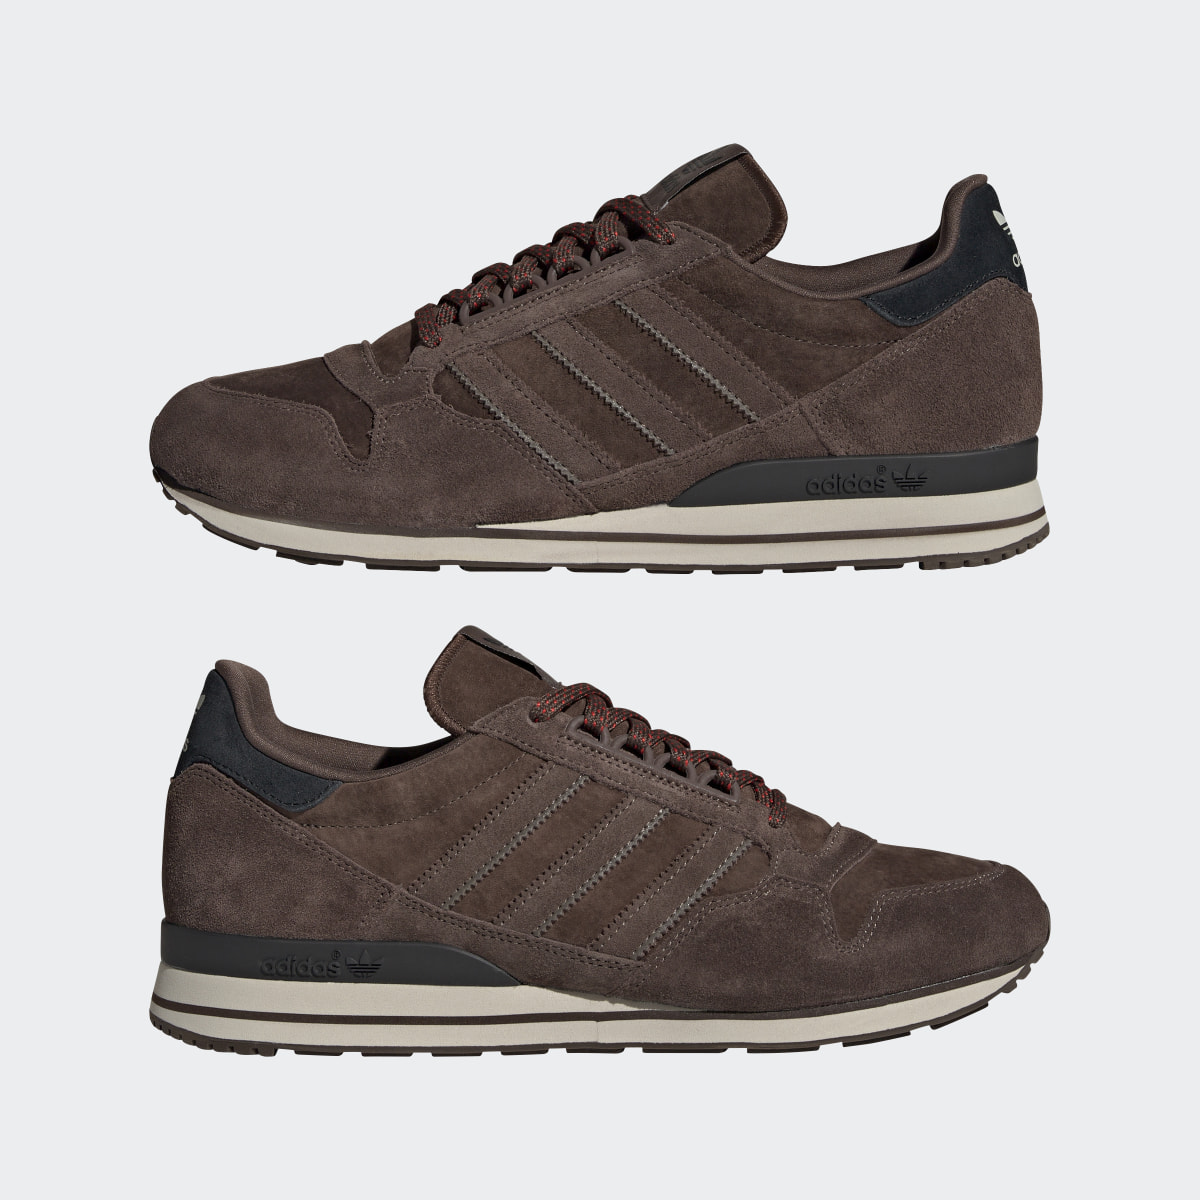 Adidas ZX 500 Shoes. 8